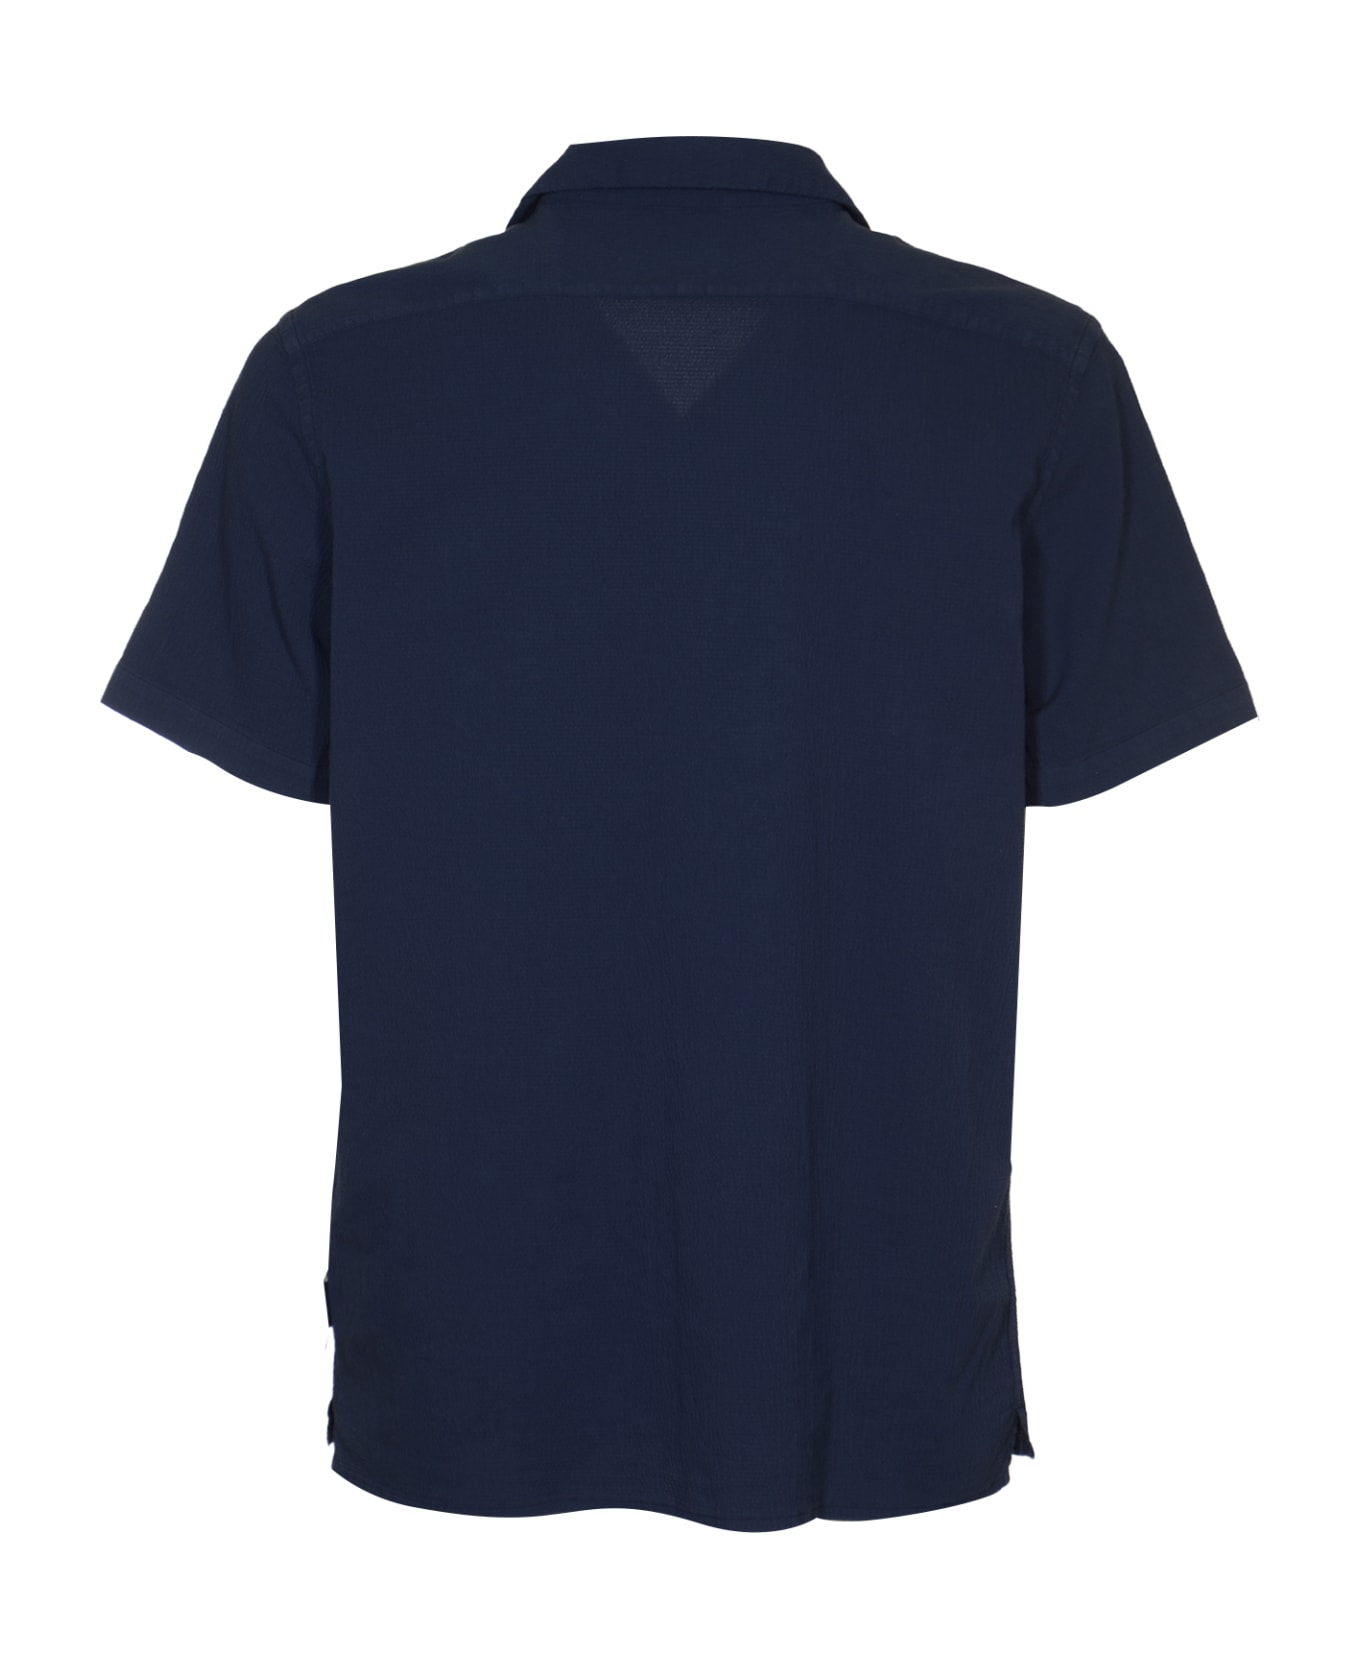 PS by Paul Smith Regular Fit Short-sleeved Shirt - NAVY シャツ